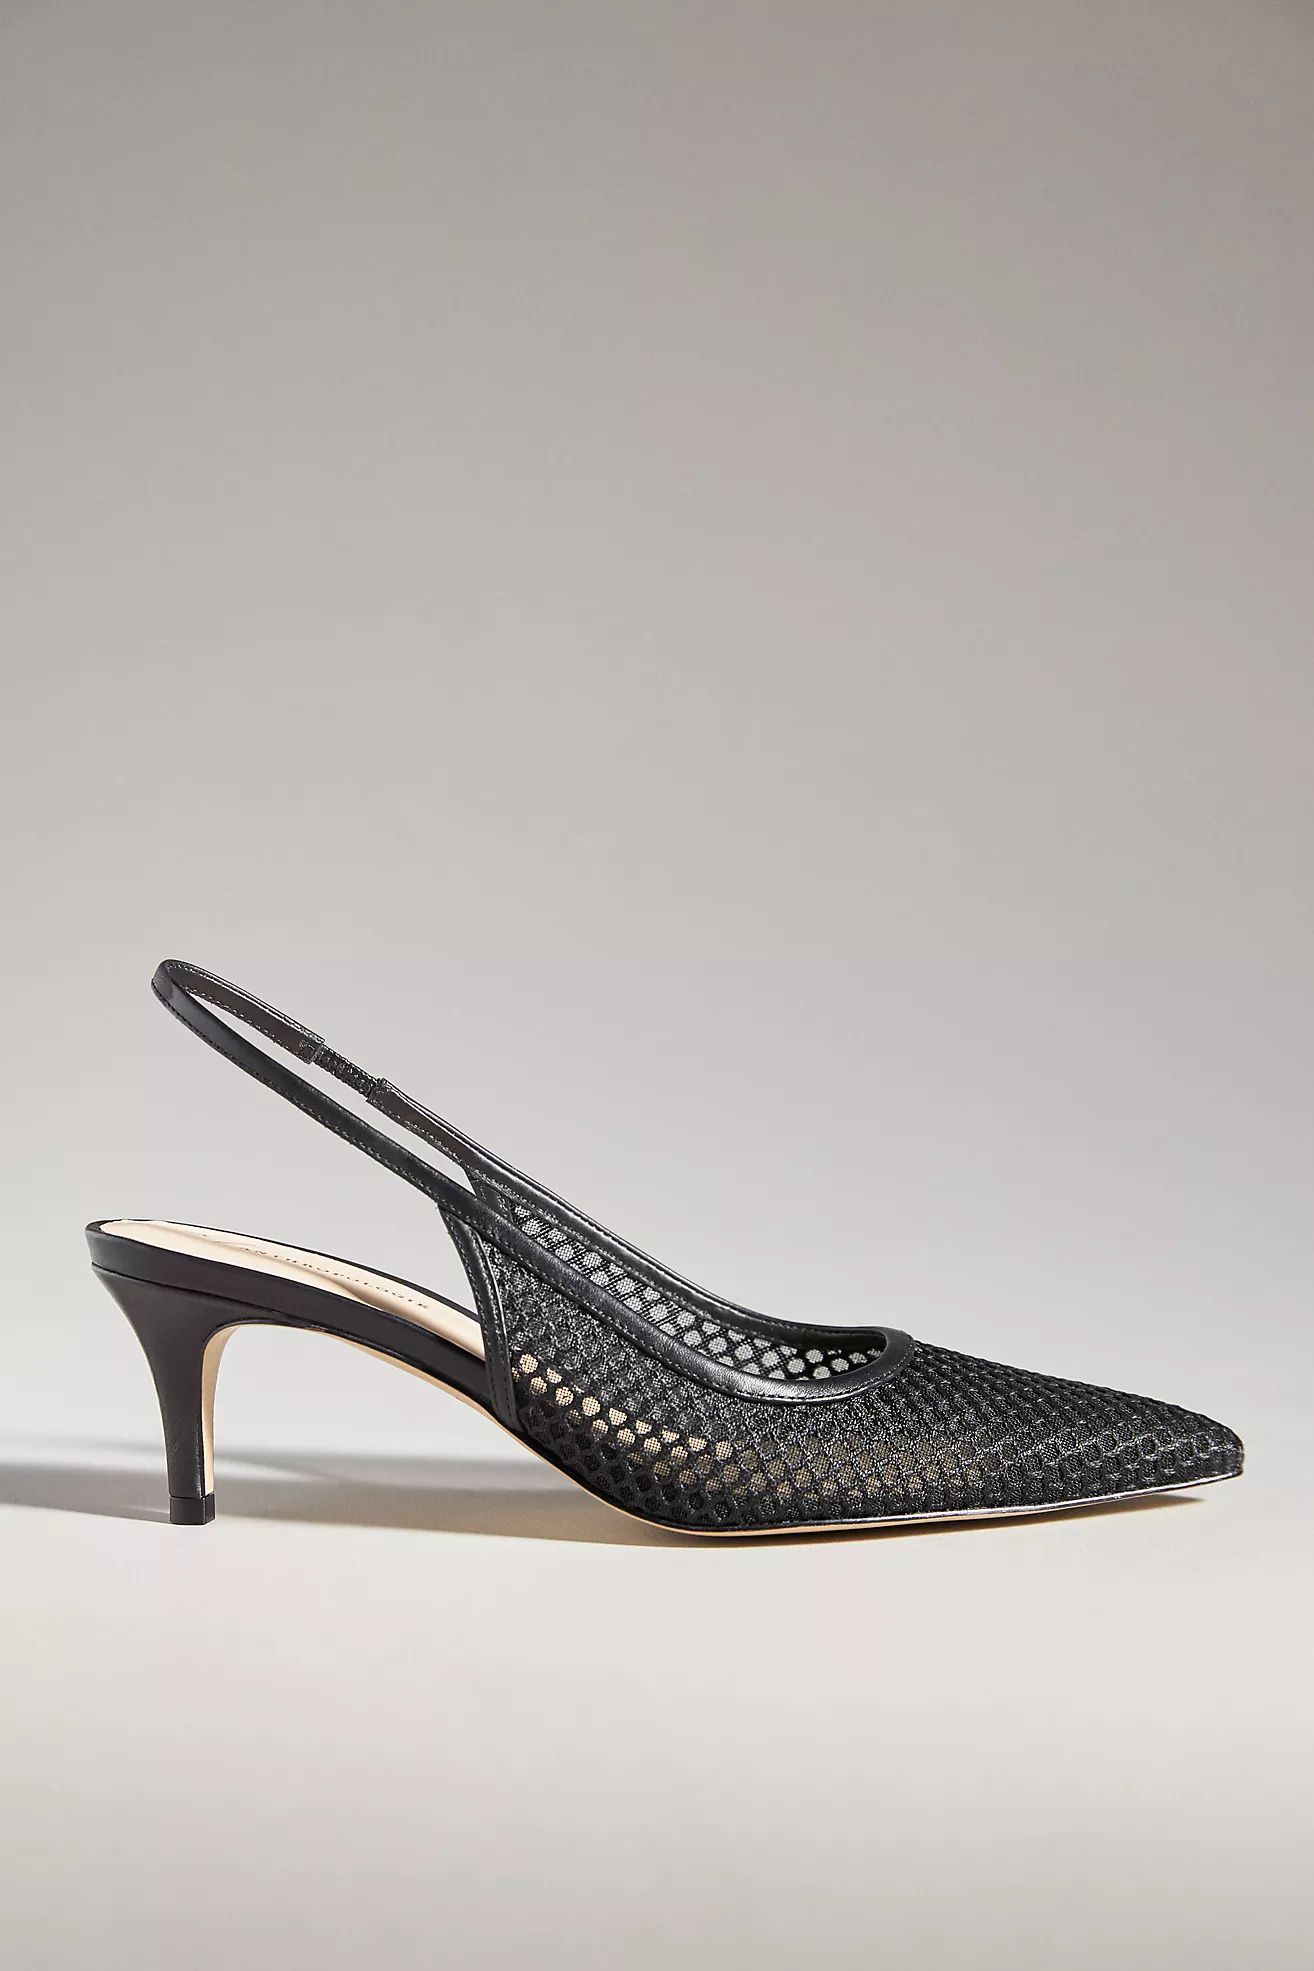 By Anthropologie Netted Slingback Heels | Anthropologie (US)